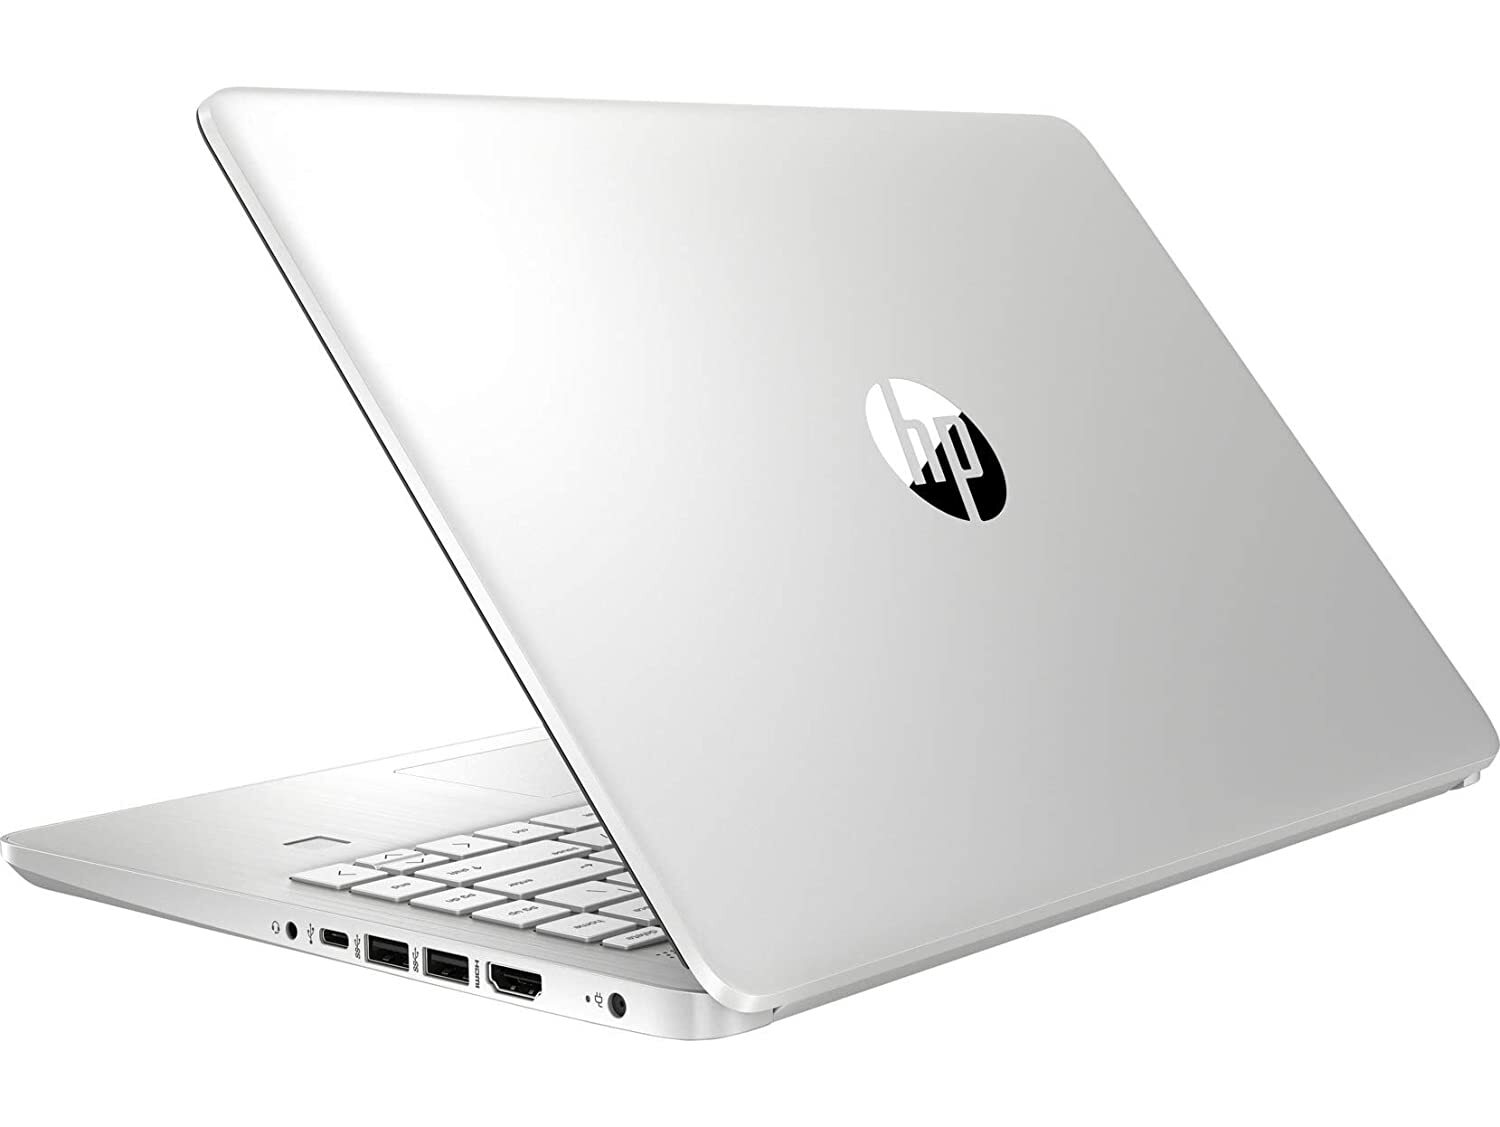 HP 14s dr1009tu 14-inch FHD Laptop (10th Gen Core i5-1035G1/8GB/512GB SSD/Windows 10 Home/MS Office/1.46 kg), Natural Silver-M000000000528 www.mysocially.com